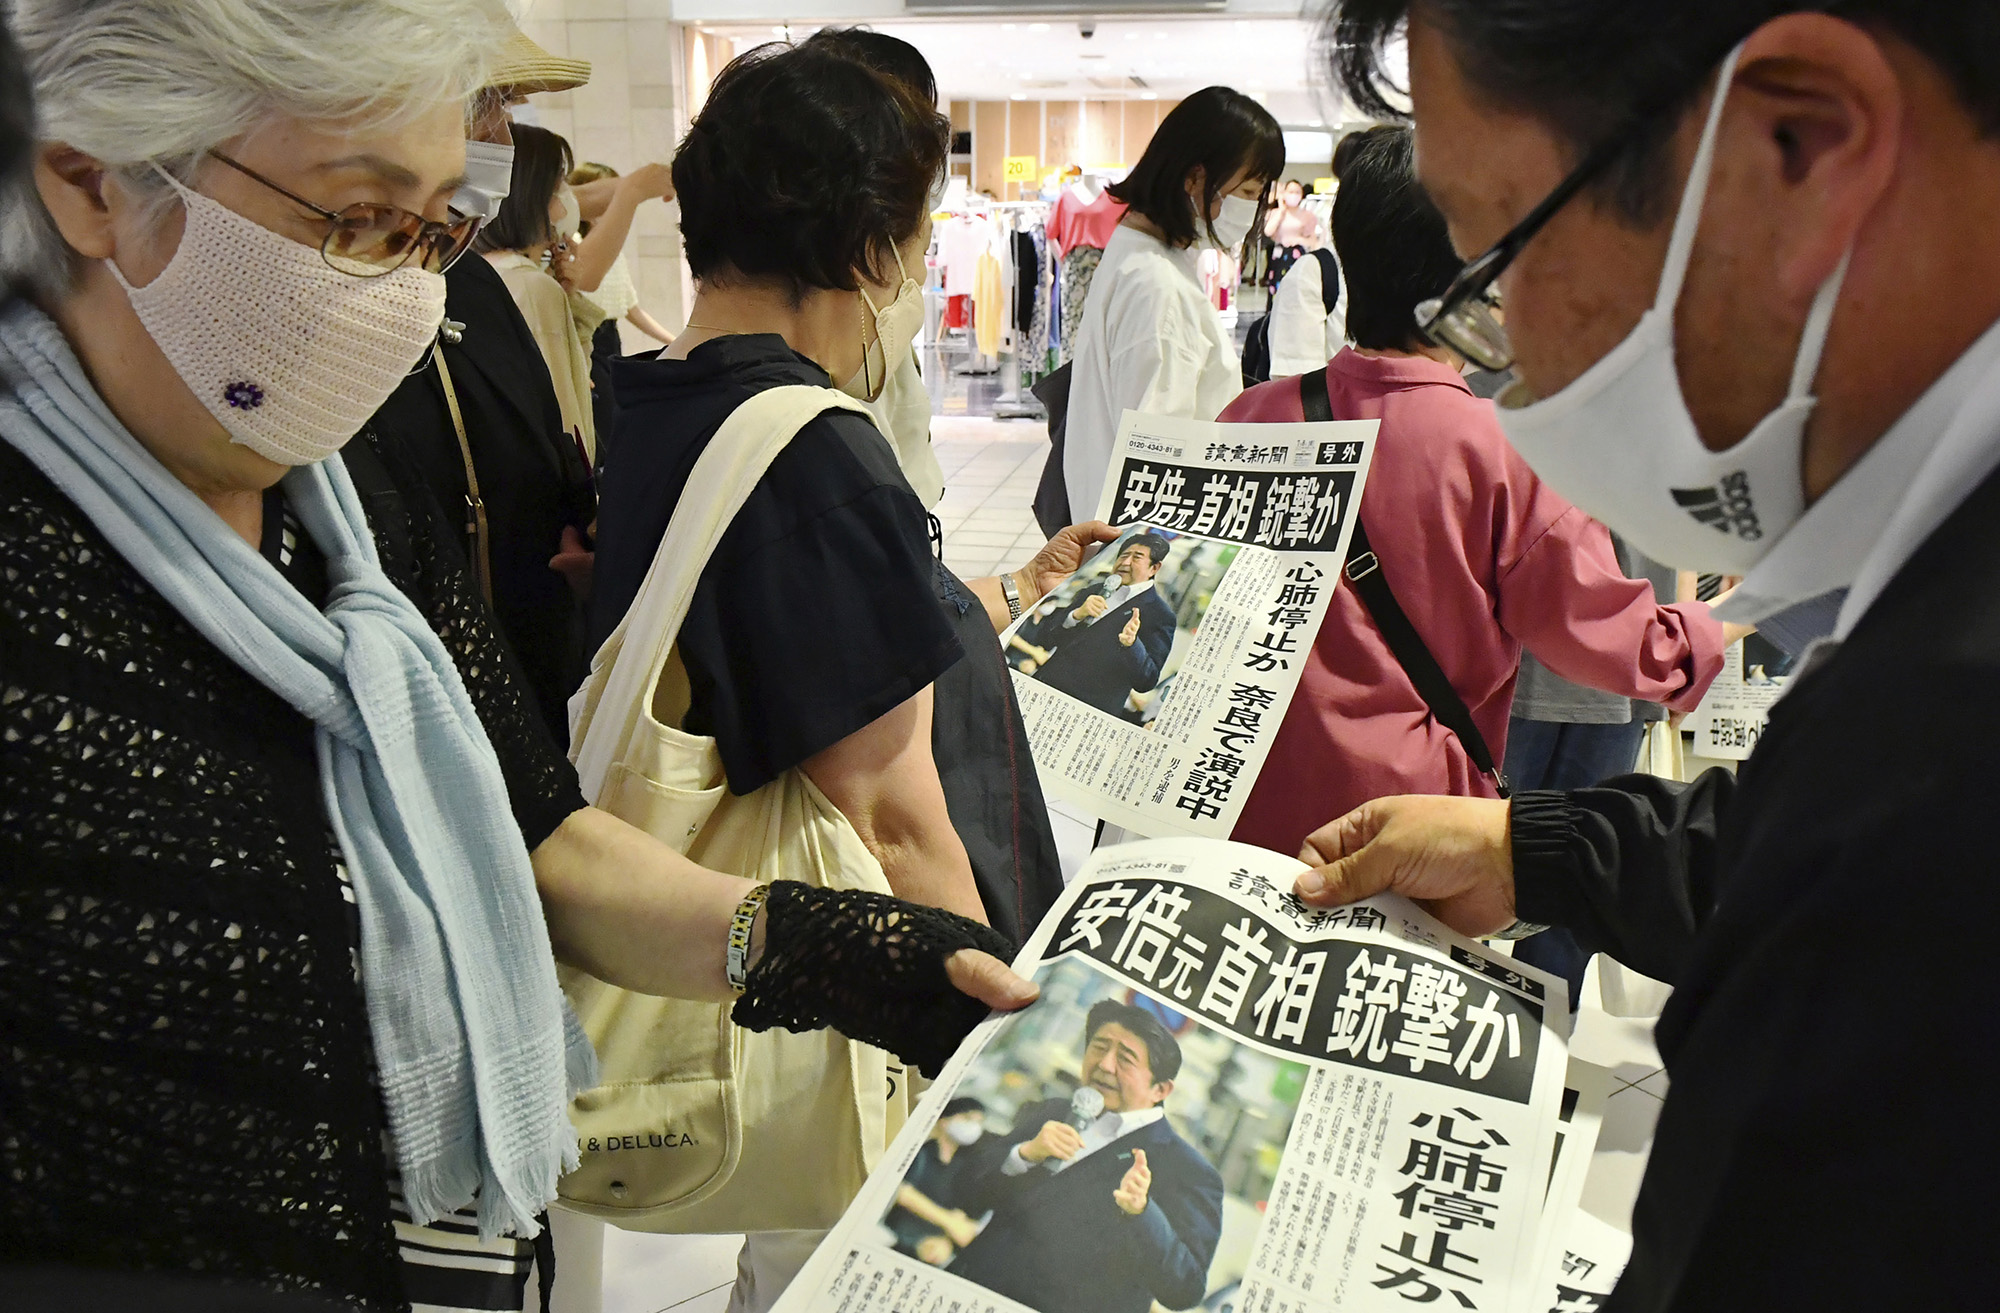 Passersby pick up an extra edition of the Yomiuri Shimbun newspaper in in Sapporo, Hokkaido Prefecture on July 8 after Japan's former Prime Minister Shinzo Abe was shot.